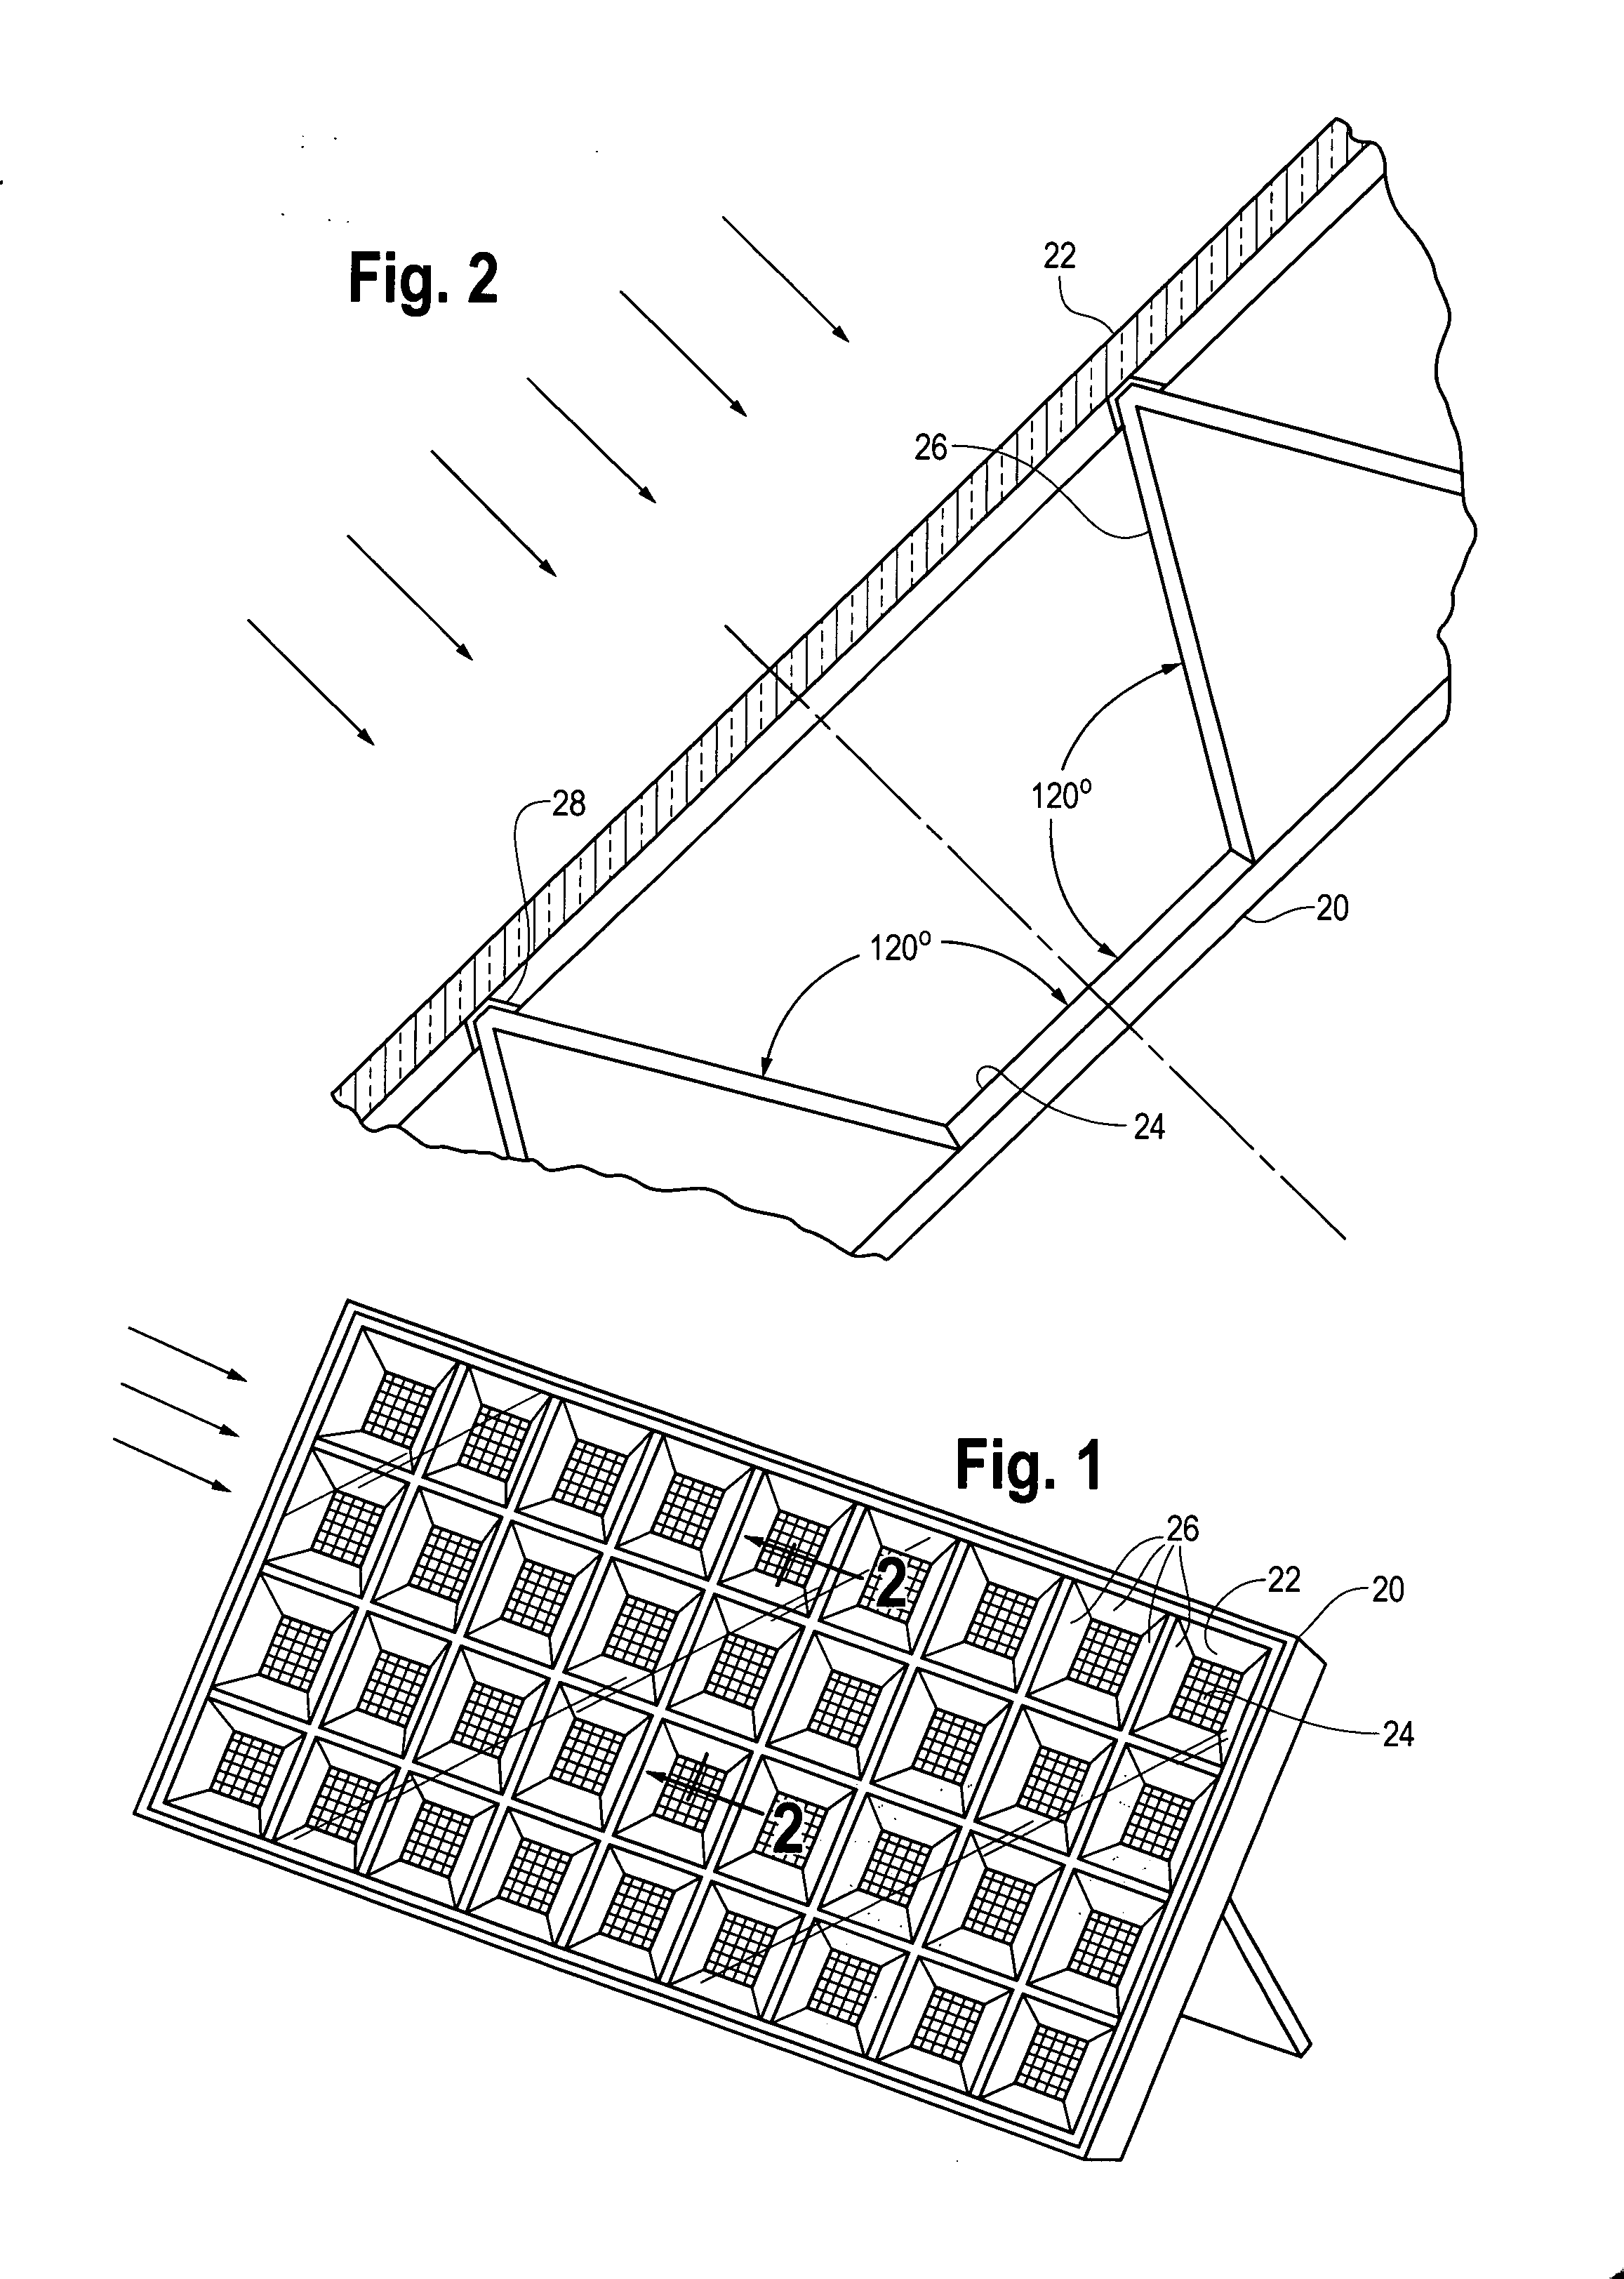 Method and apparatus for arranging multiple flat reflector facets around a solar cell or solar panel